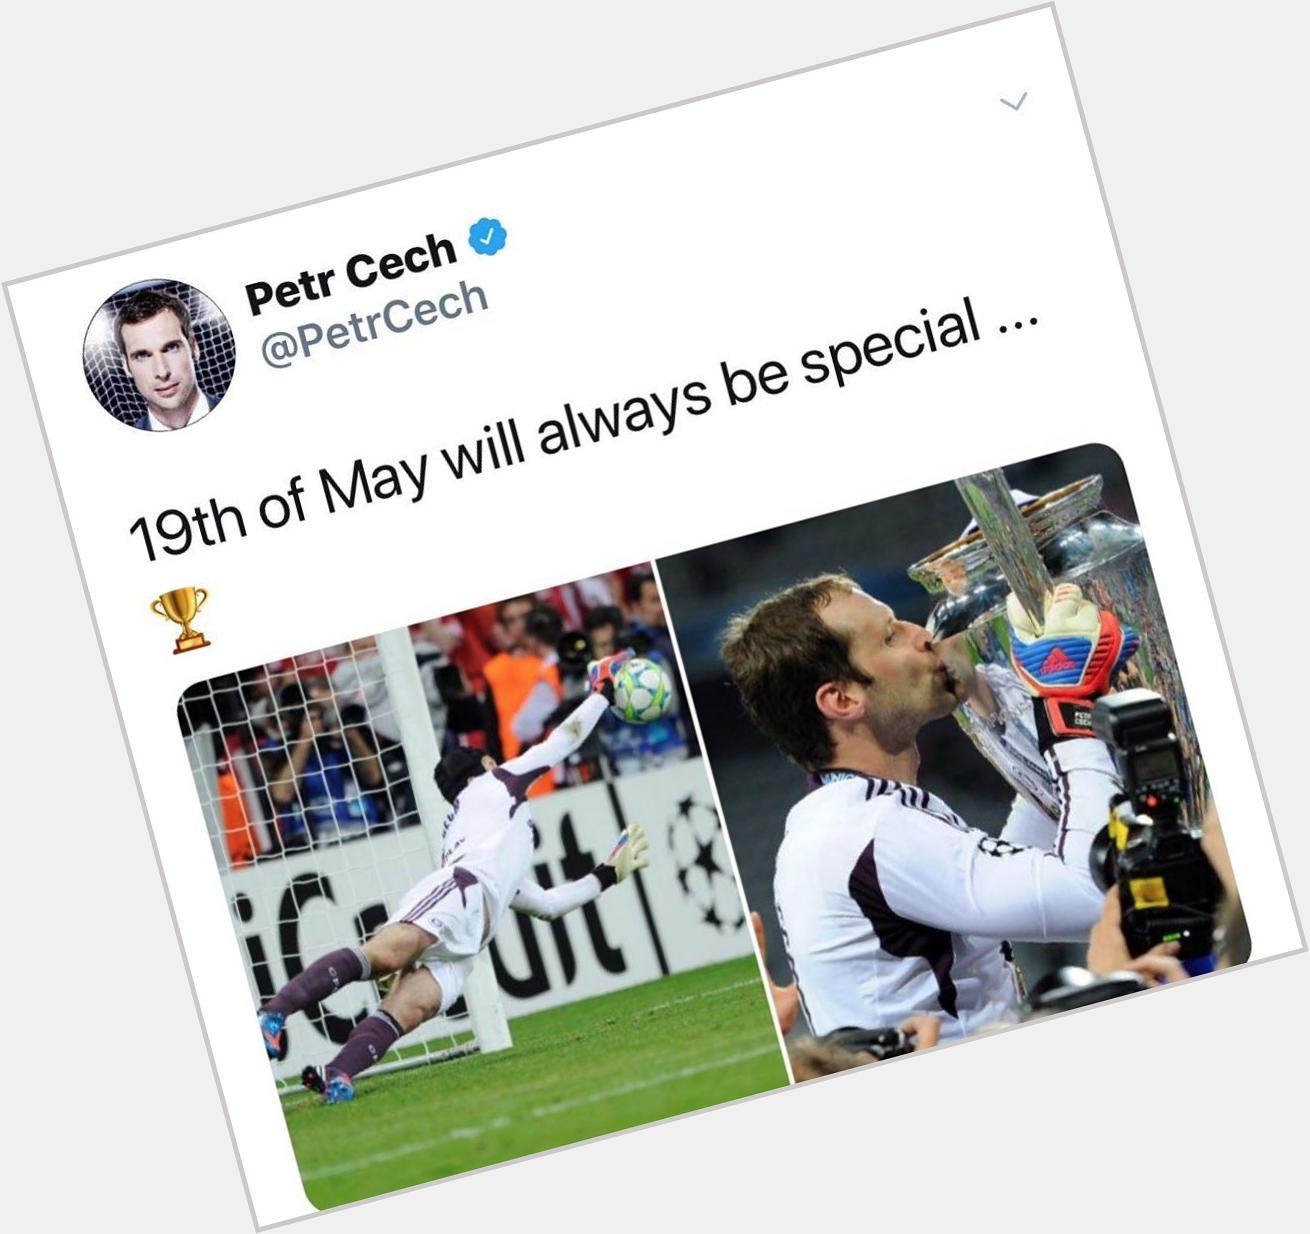 Happy birthday to our own Petr Cech who turns 37 today.   